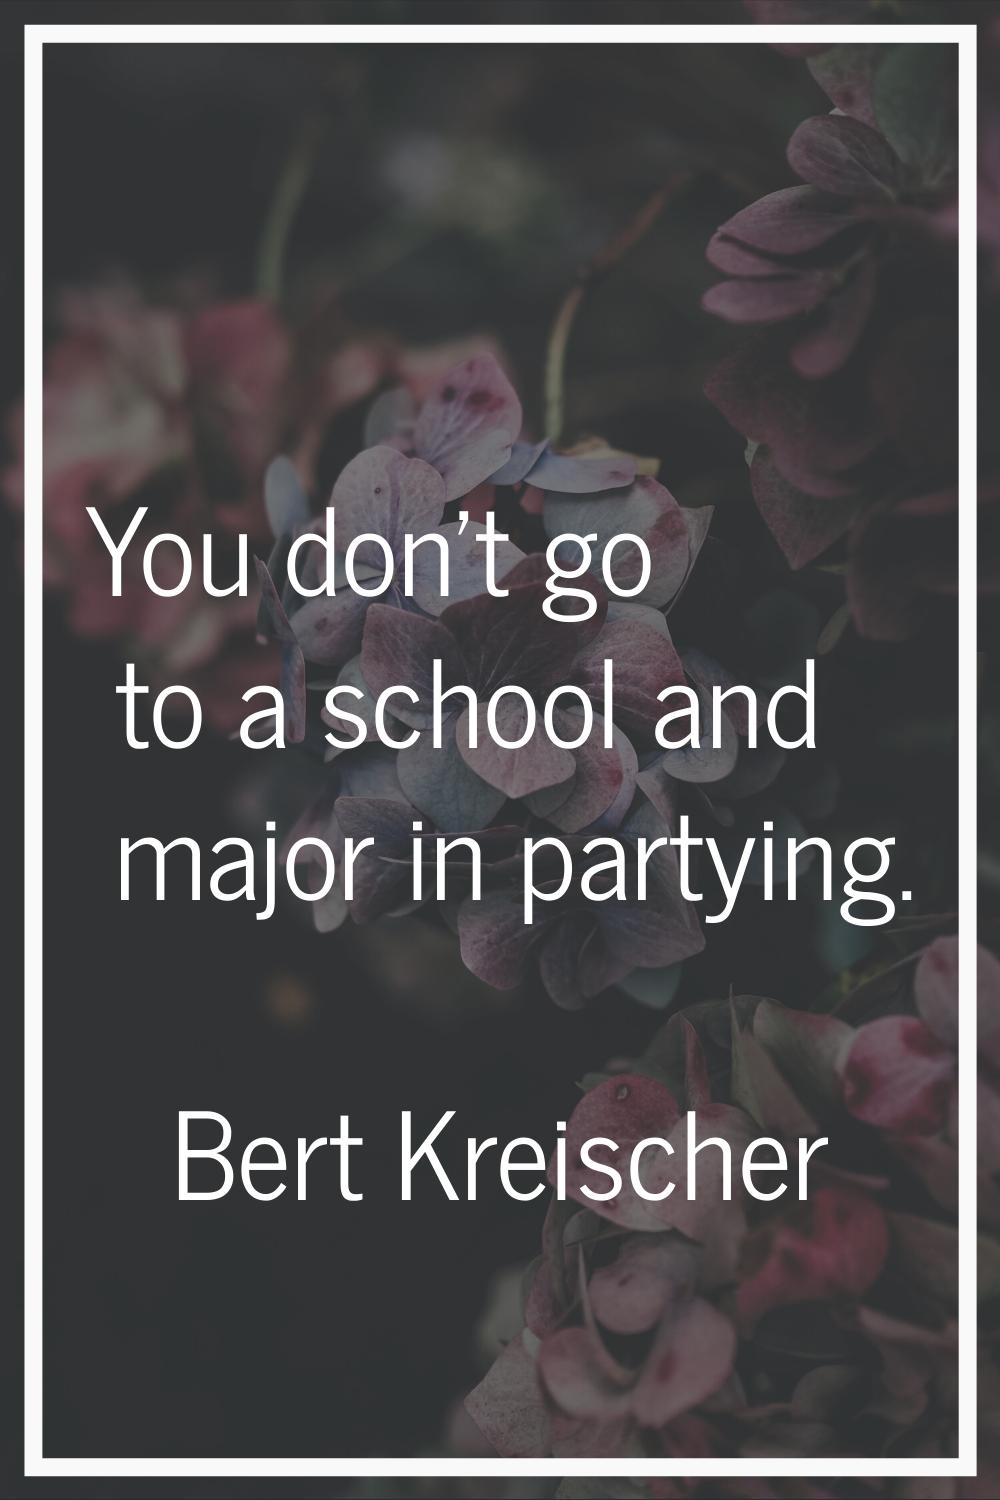 You don't go to a school and major in partying.